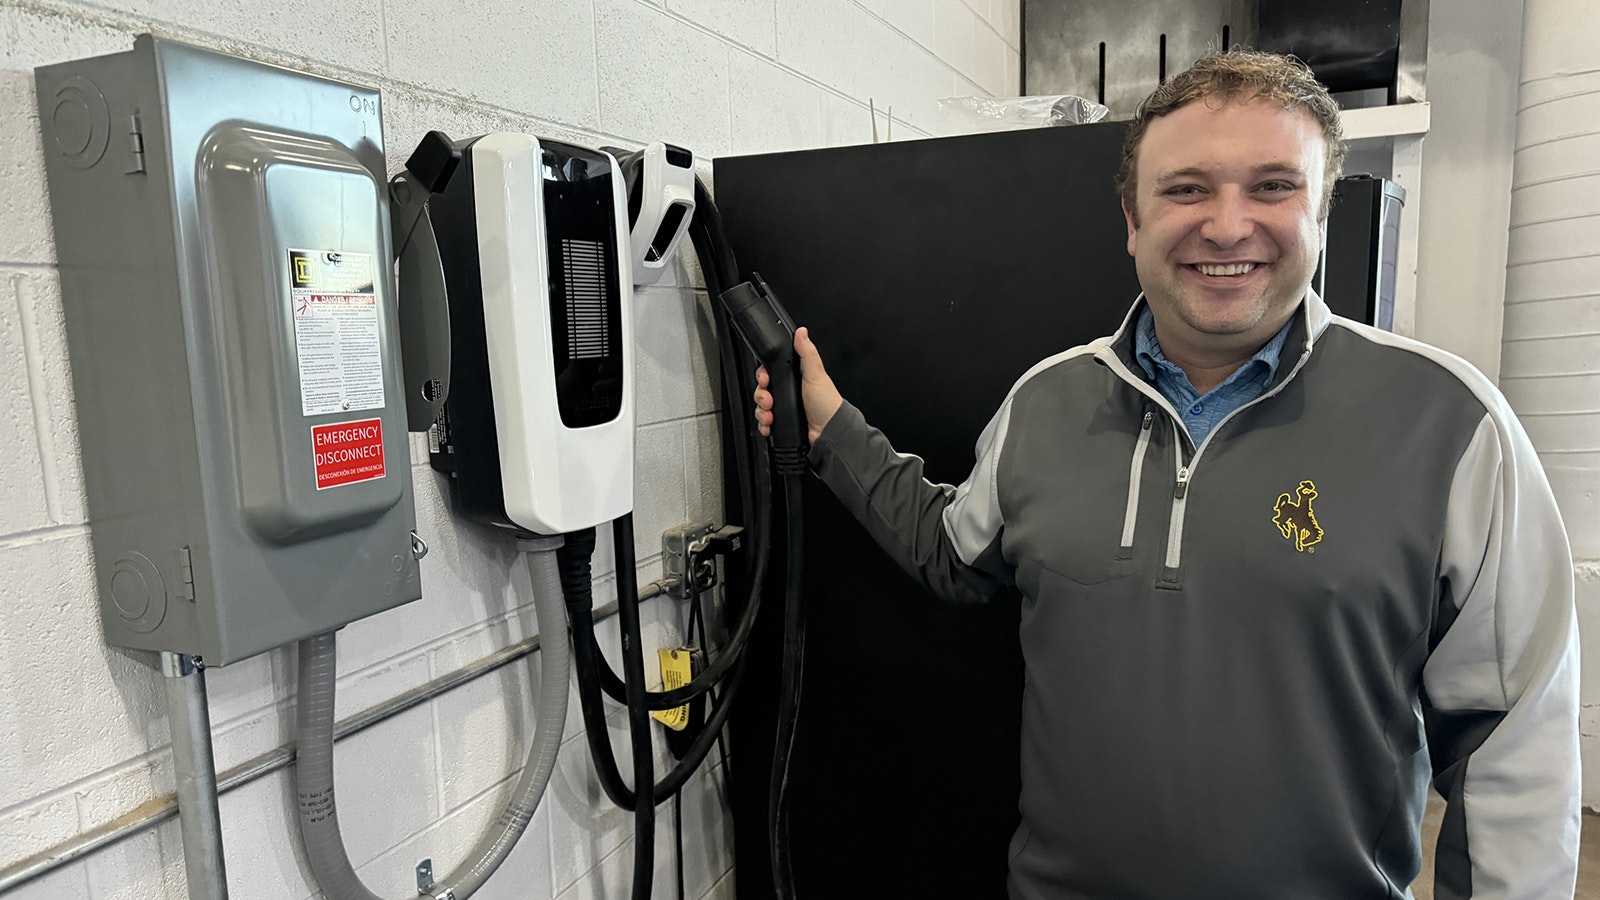 Dallas Tyrrell, owner of Tyrell Honda and Chevrolet dealerships in Cheyenne, said that consumers should drive the electric vehicle (EV) market, not the government telling us. Tyrell invested more than $150,000 in an EV charging station in his dealership.